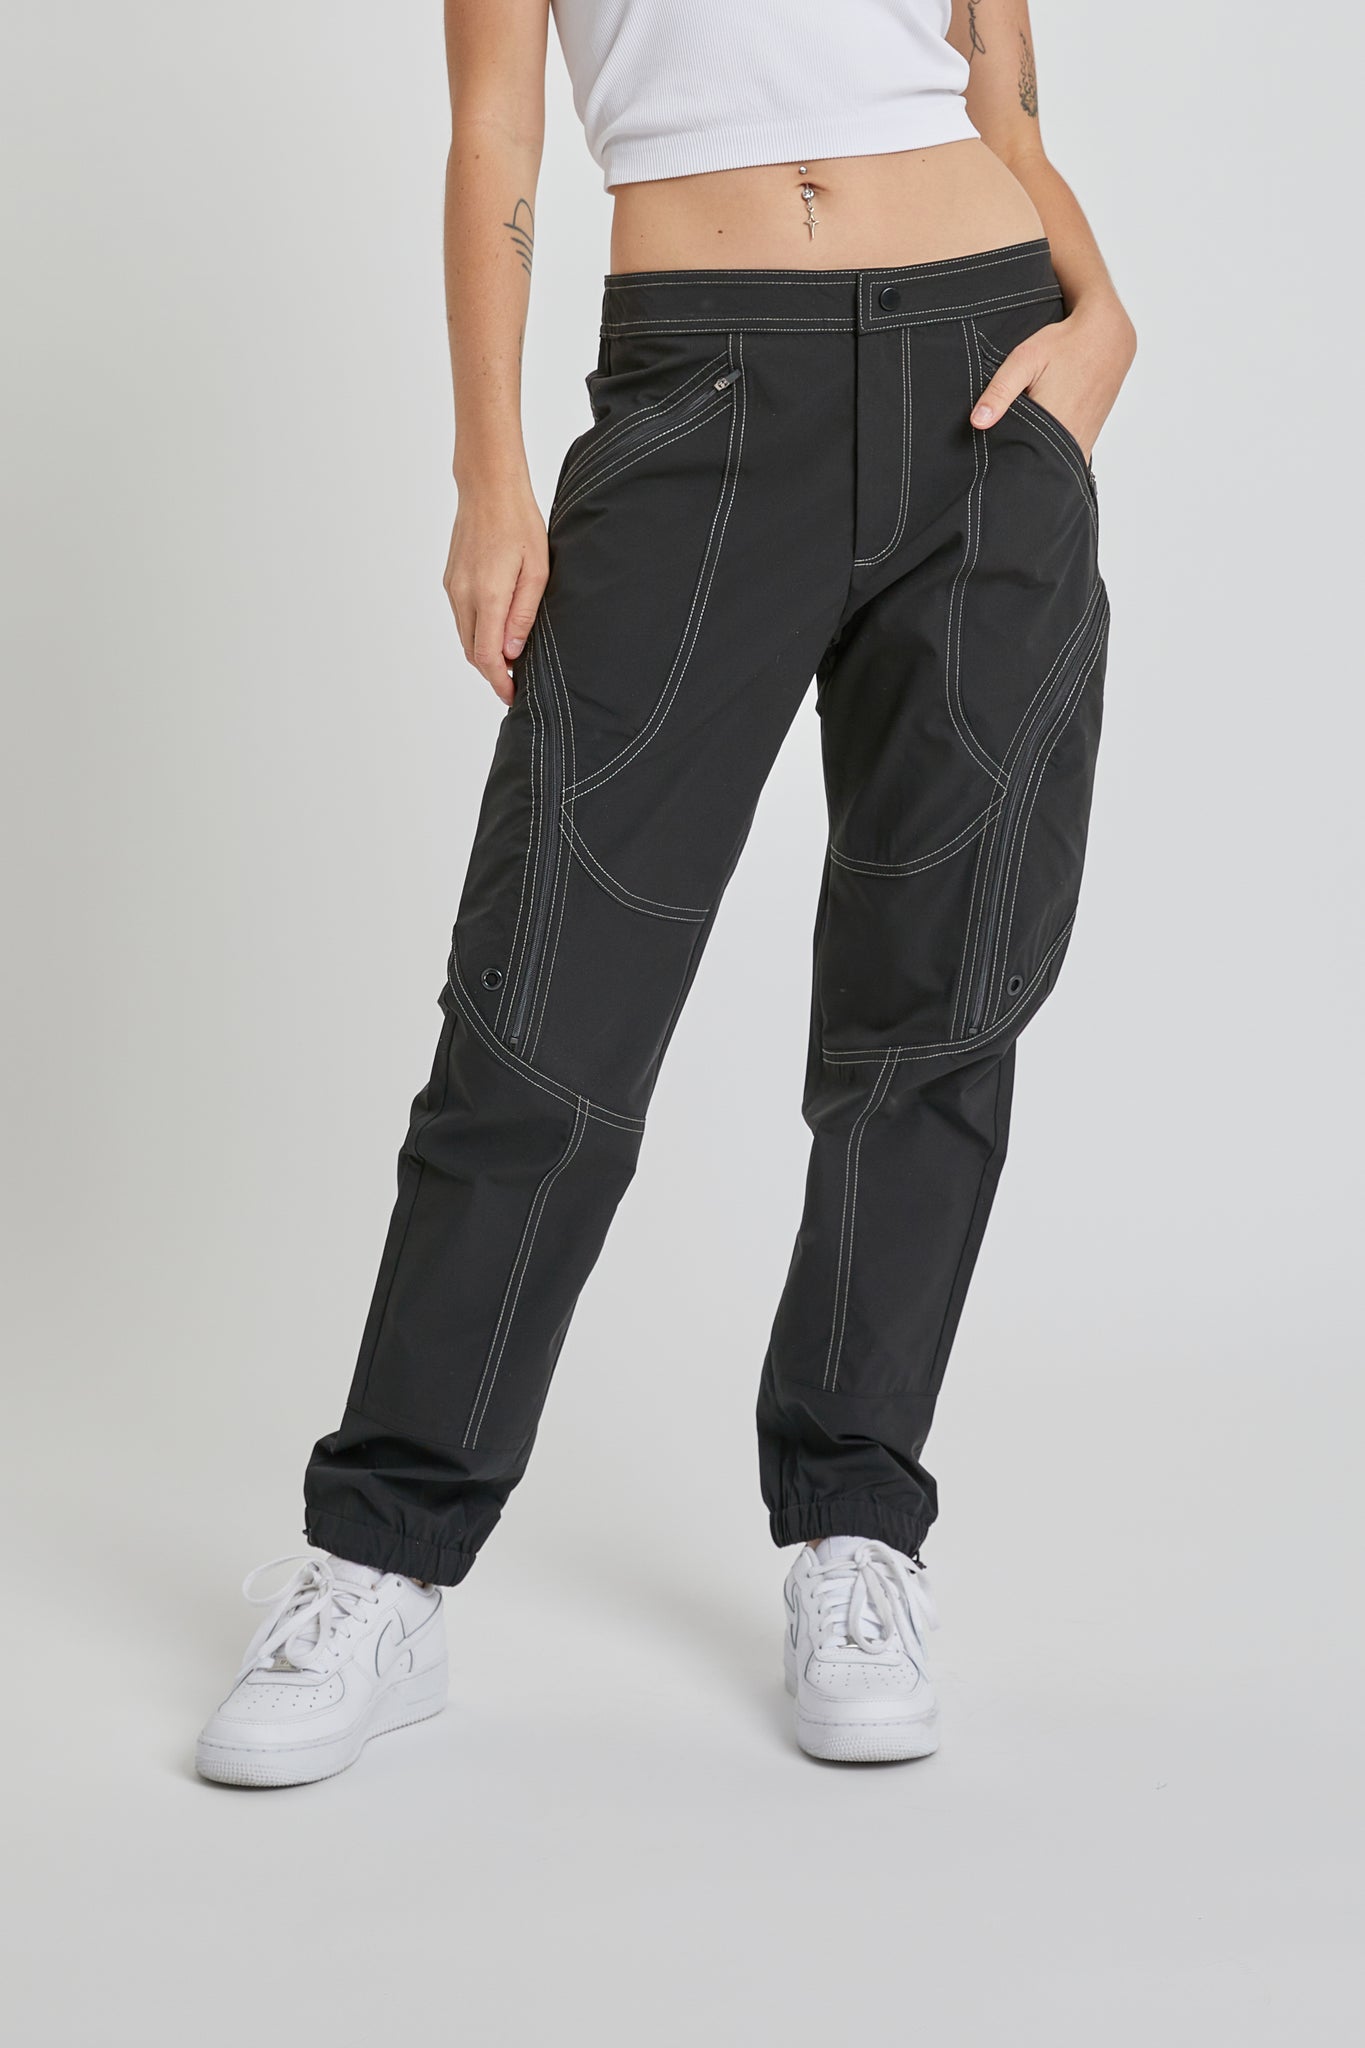  SEVEGO Lightweight Women's 32 Tall Inseam Cotton Soft Jogger  with Zipper Pockets Cargo Pants Black X-Small : Clothing, Shoes & Jewelry